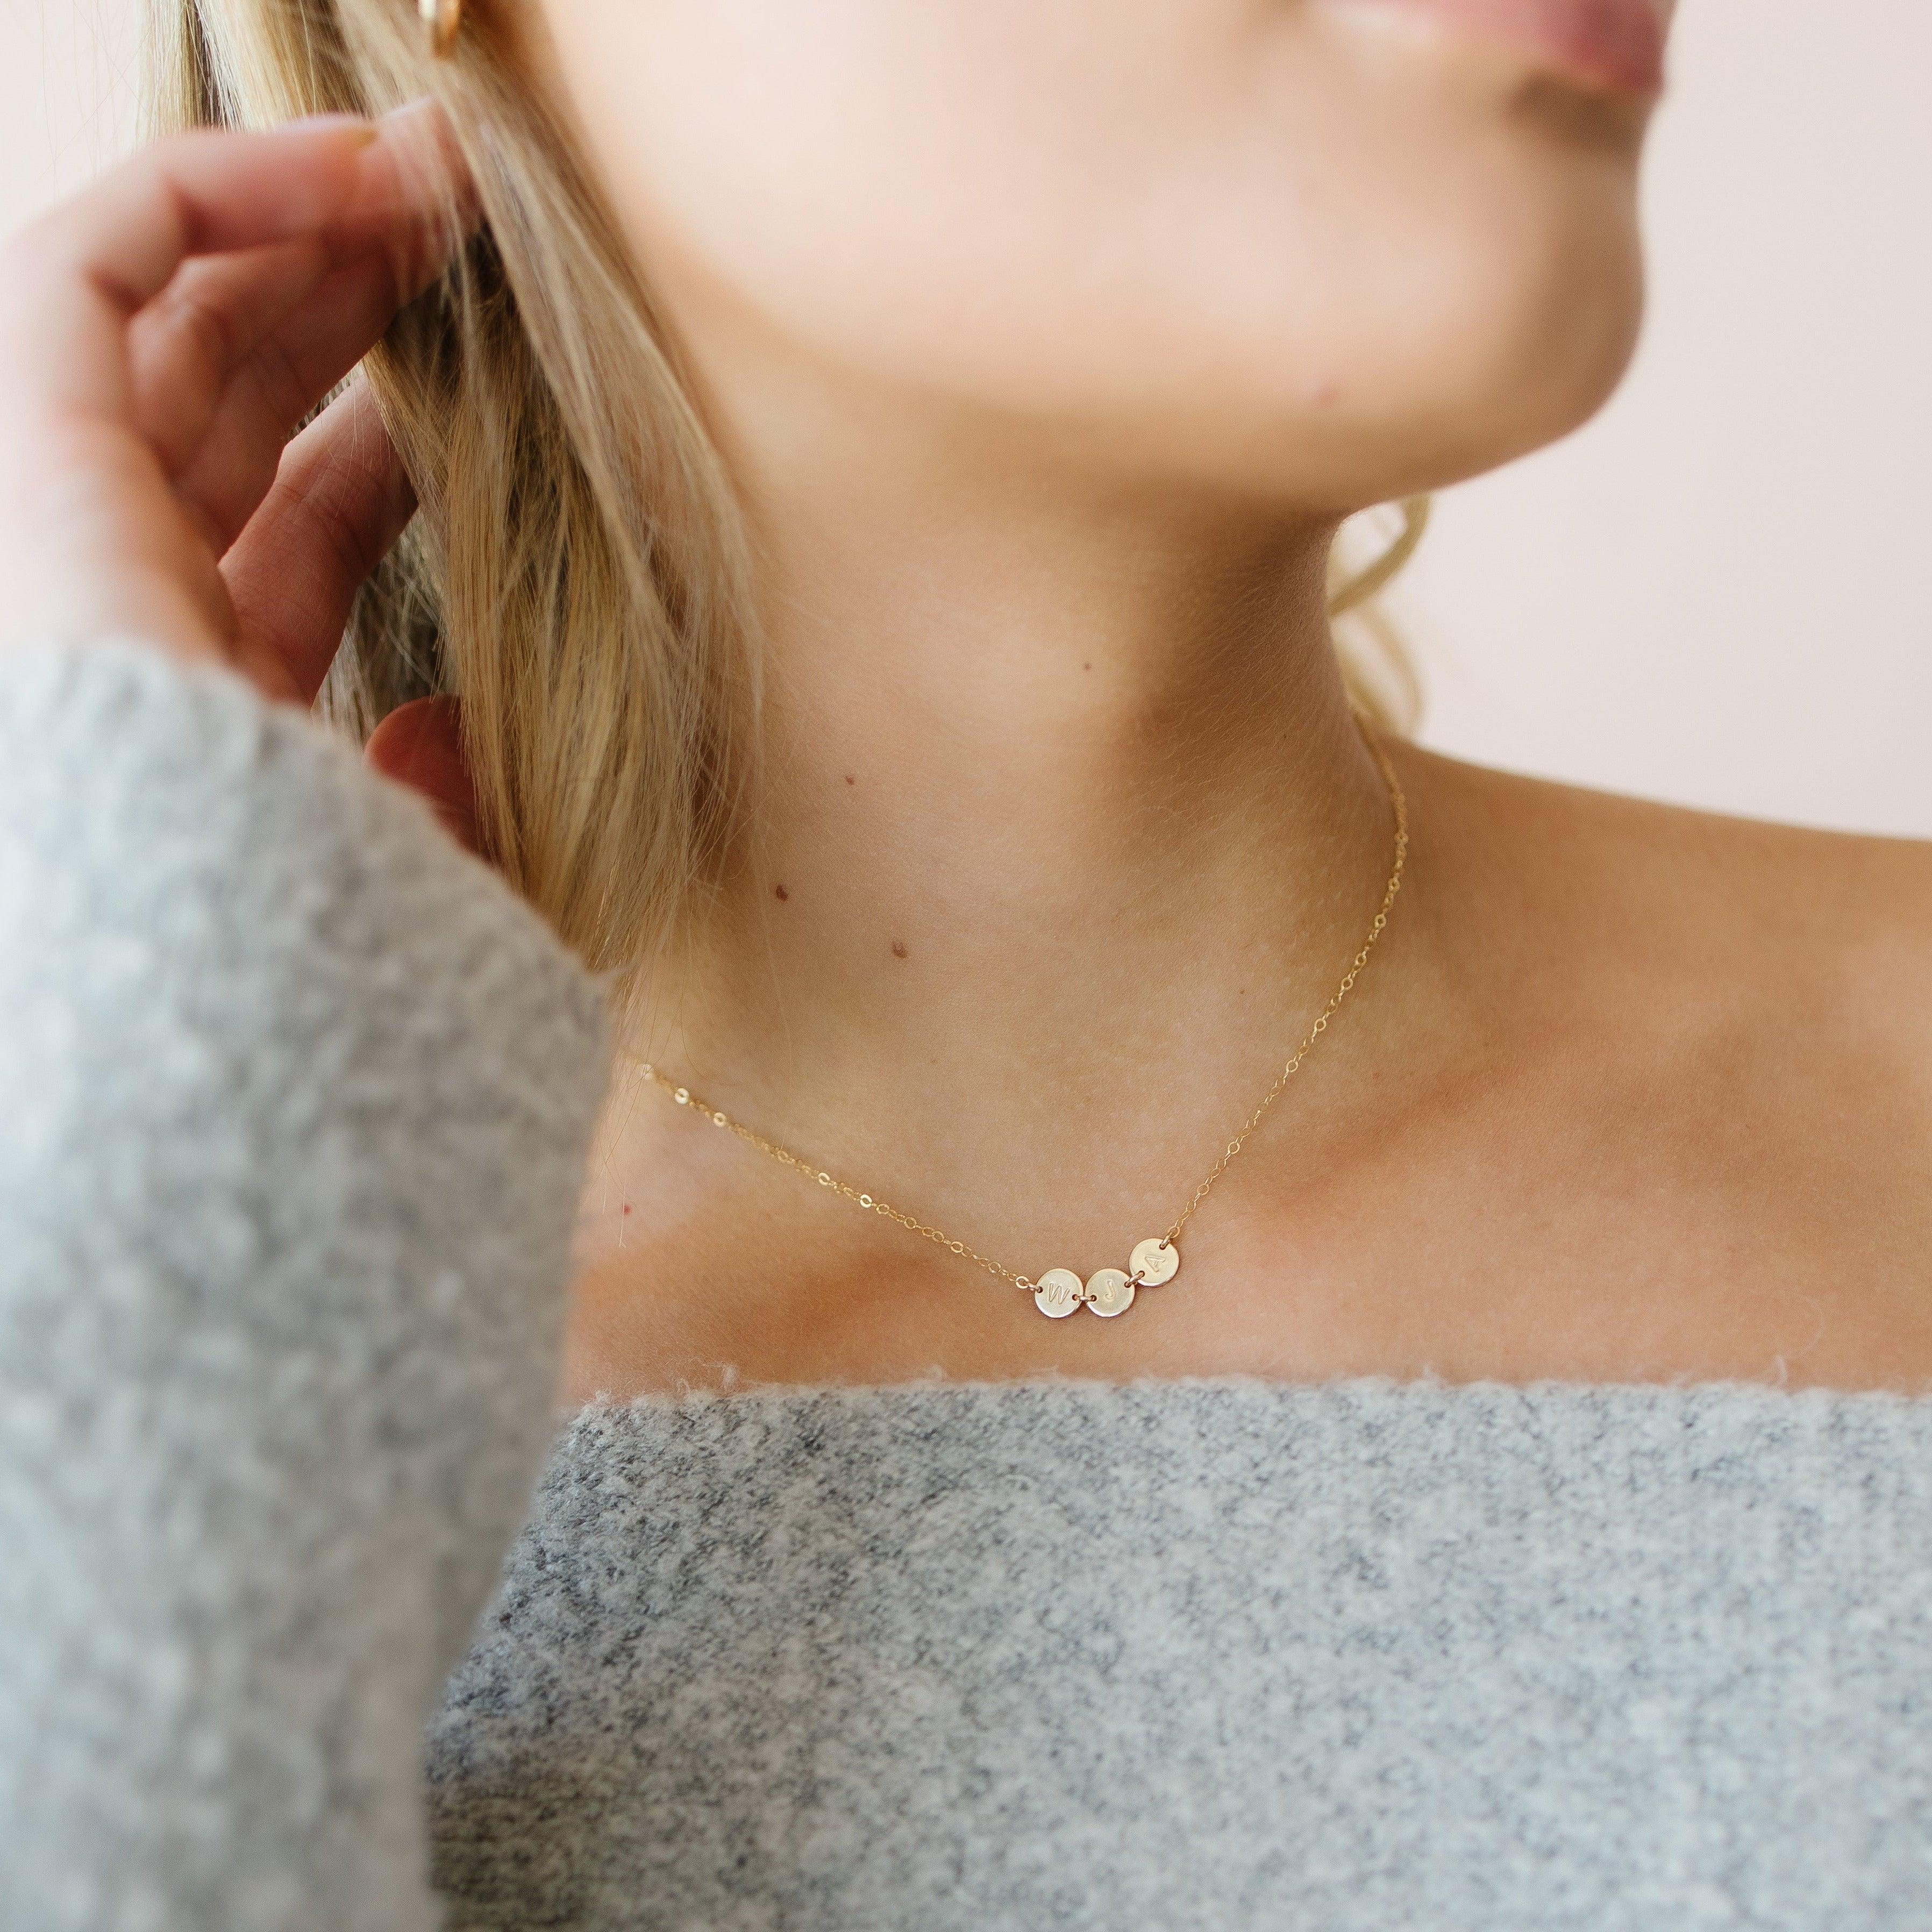 Hazel Linked Initial Necklace - Nolia Jewelry - Meaningful + Sustainably Handcrafted Jewelry